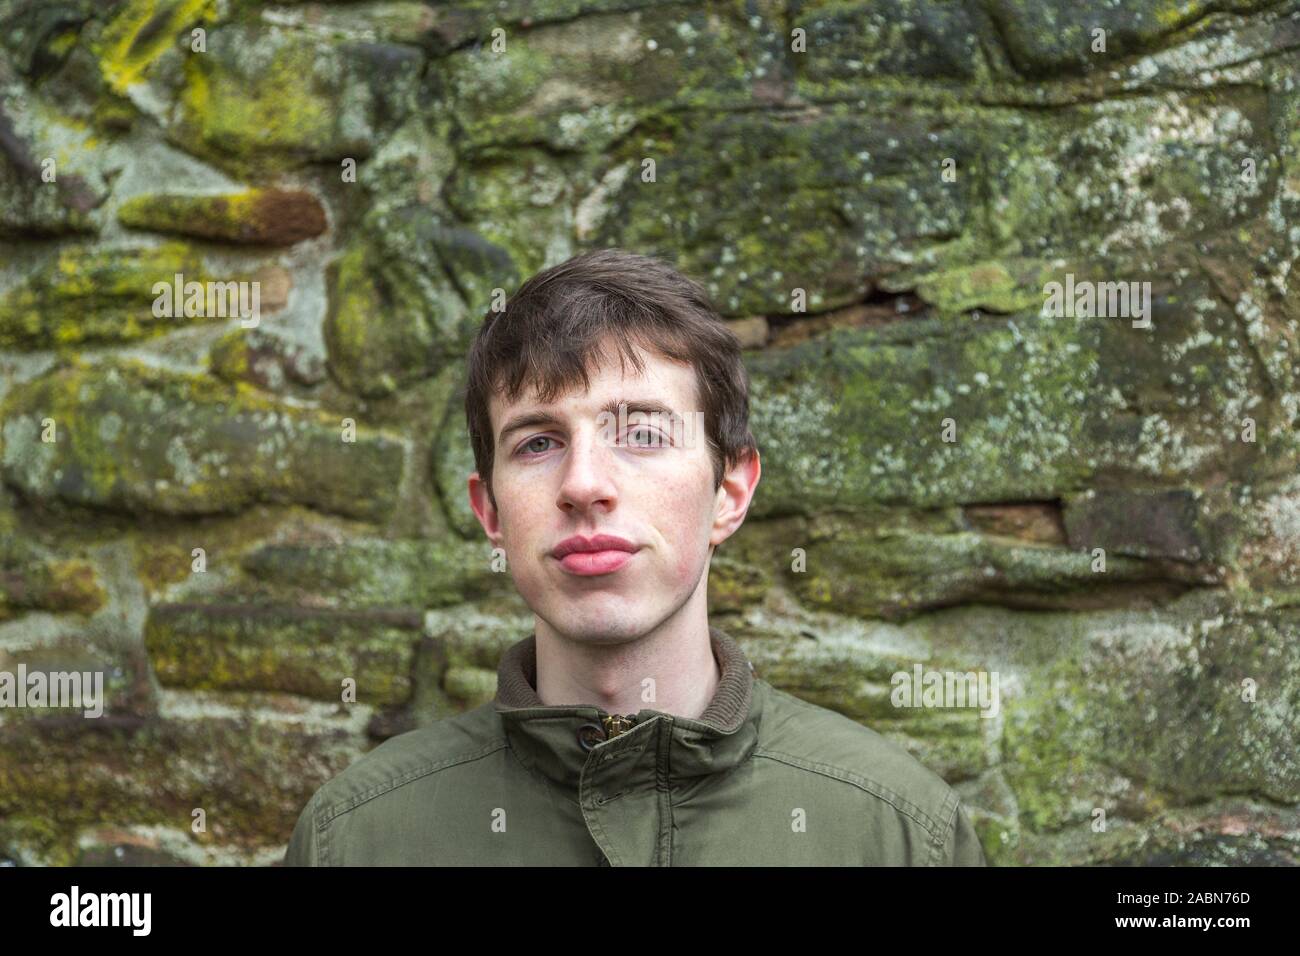 Head and shoulders of a confident and friendly young man, late teens or 20 something, standing next to a stone wall with copy space. Stock Photo